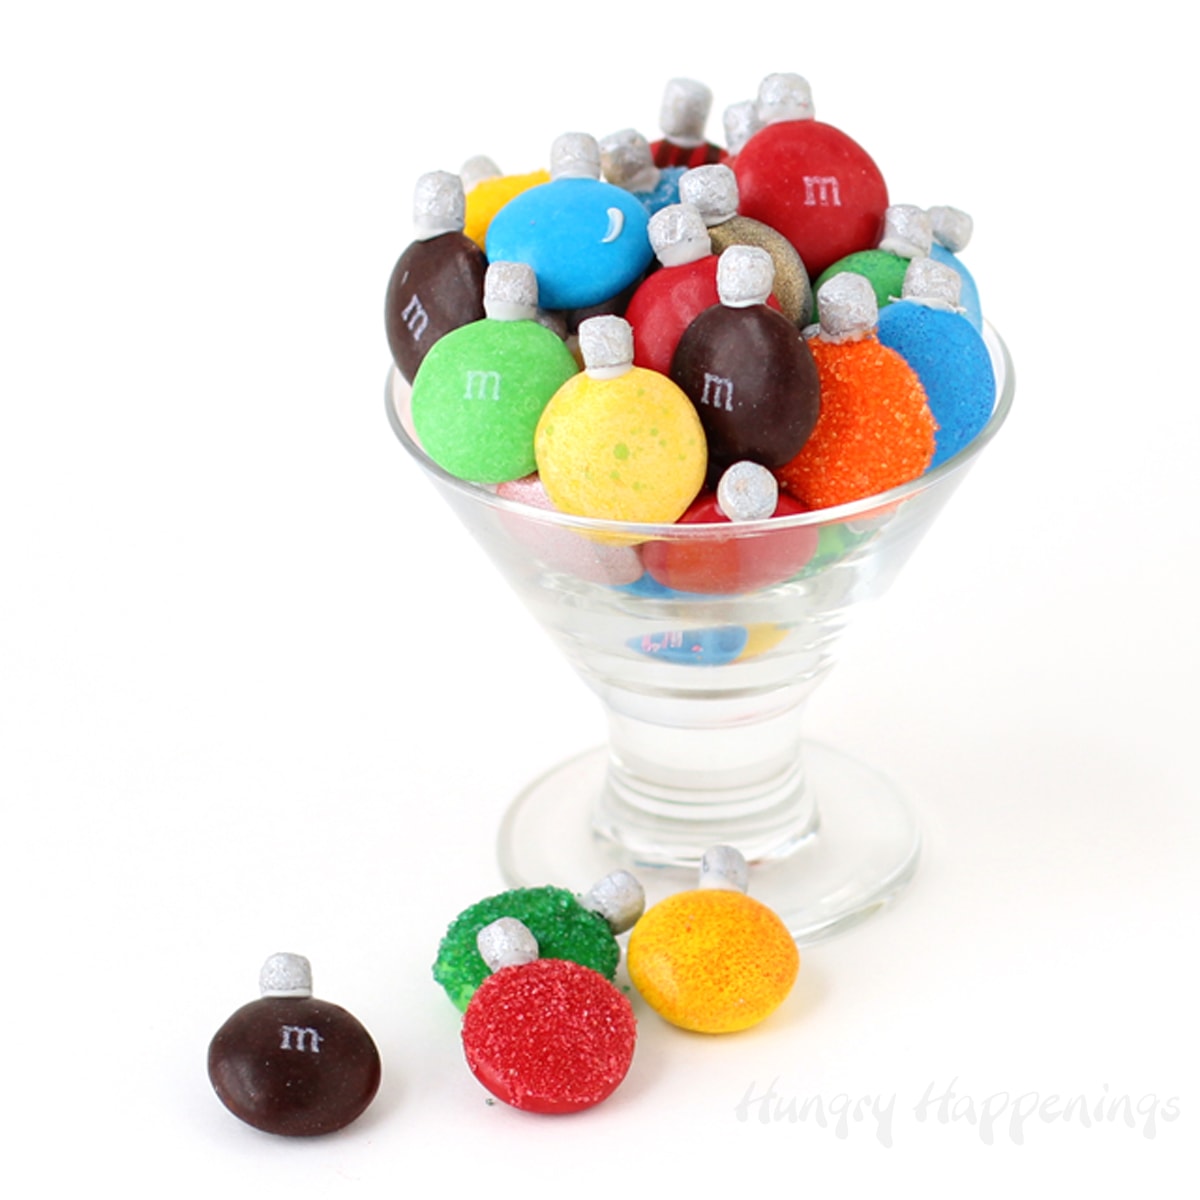 candy Christmas ornaments made with M&M's and dehydrated marshmallows. 